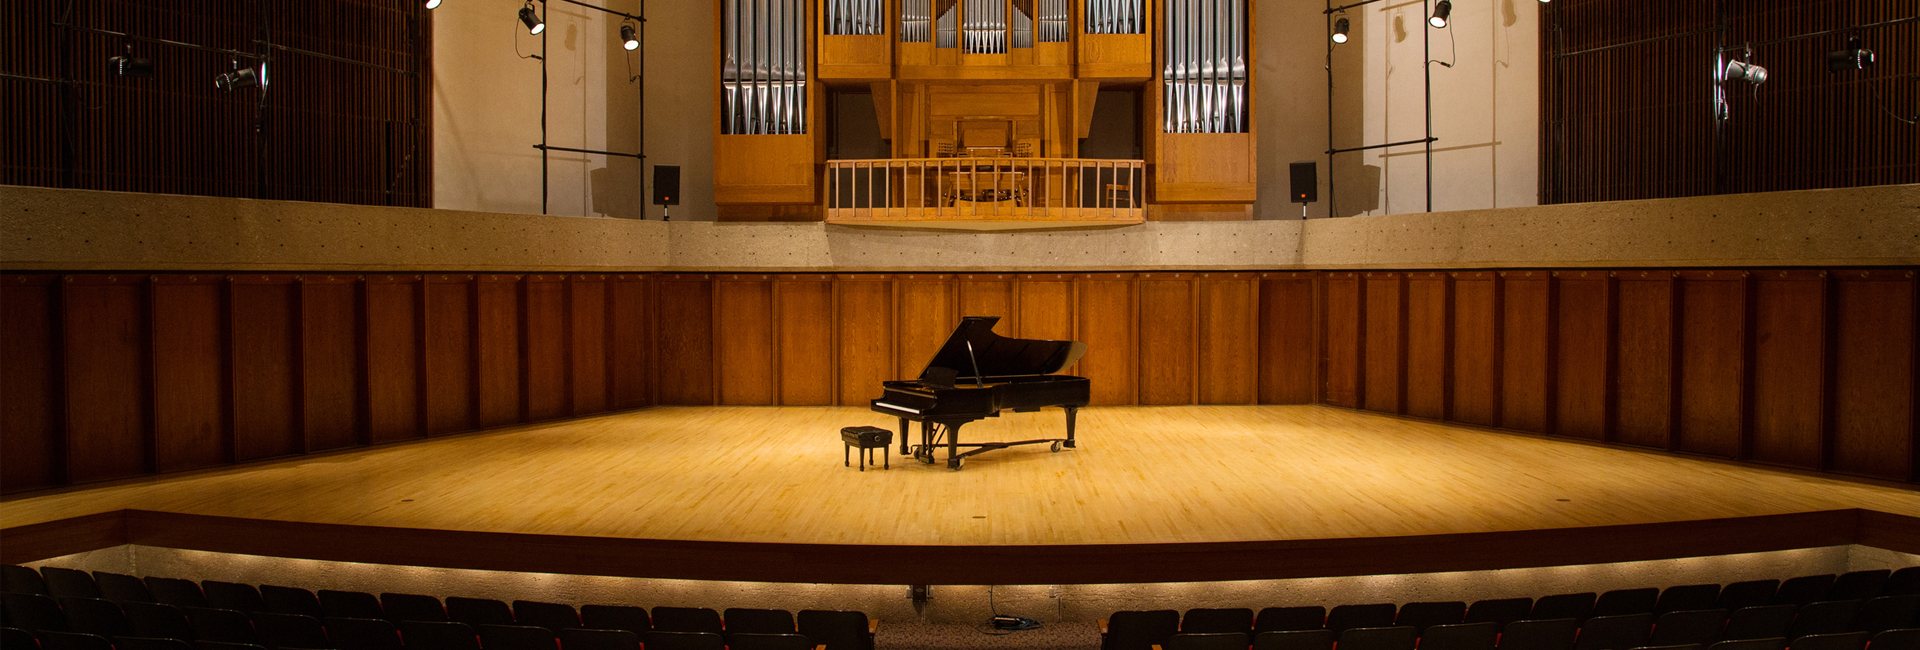 The concert will be held in the Strauss Performing Arts Center's Recital Hall